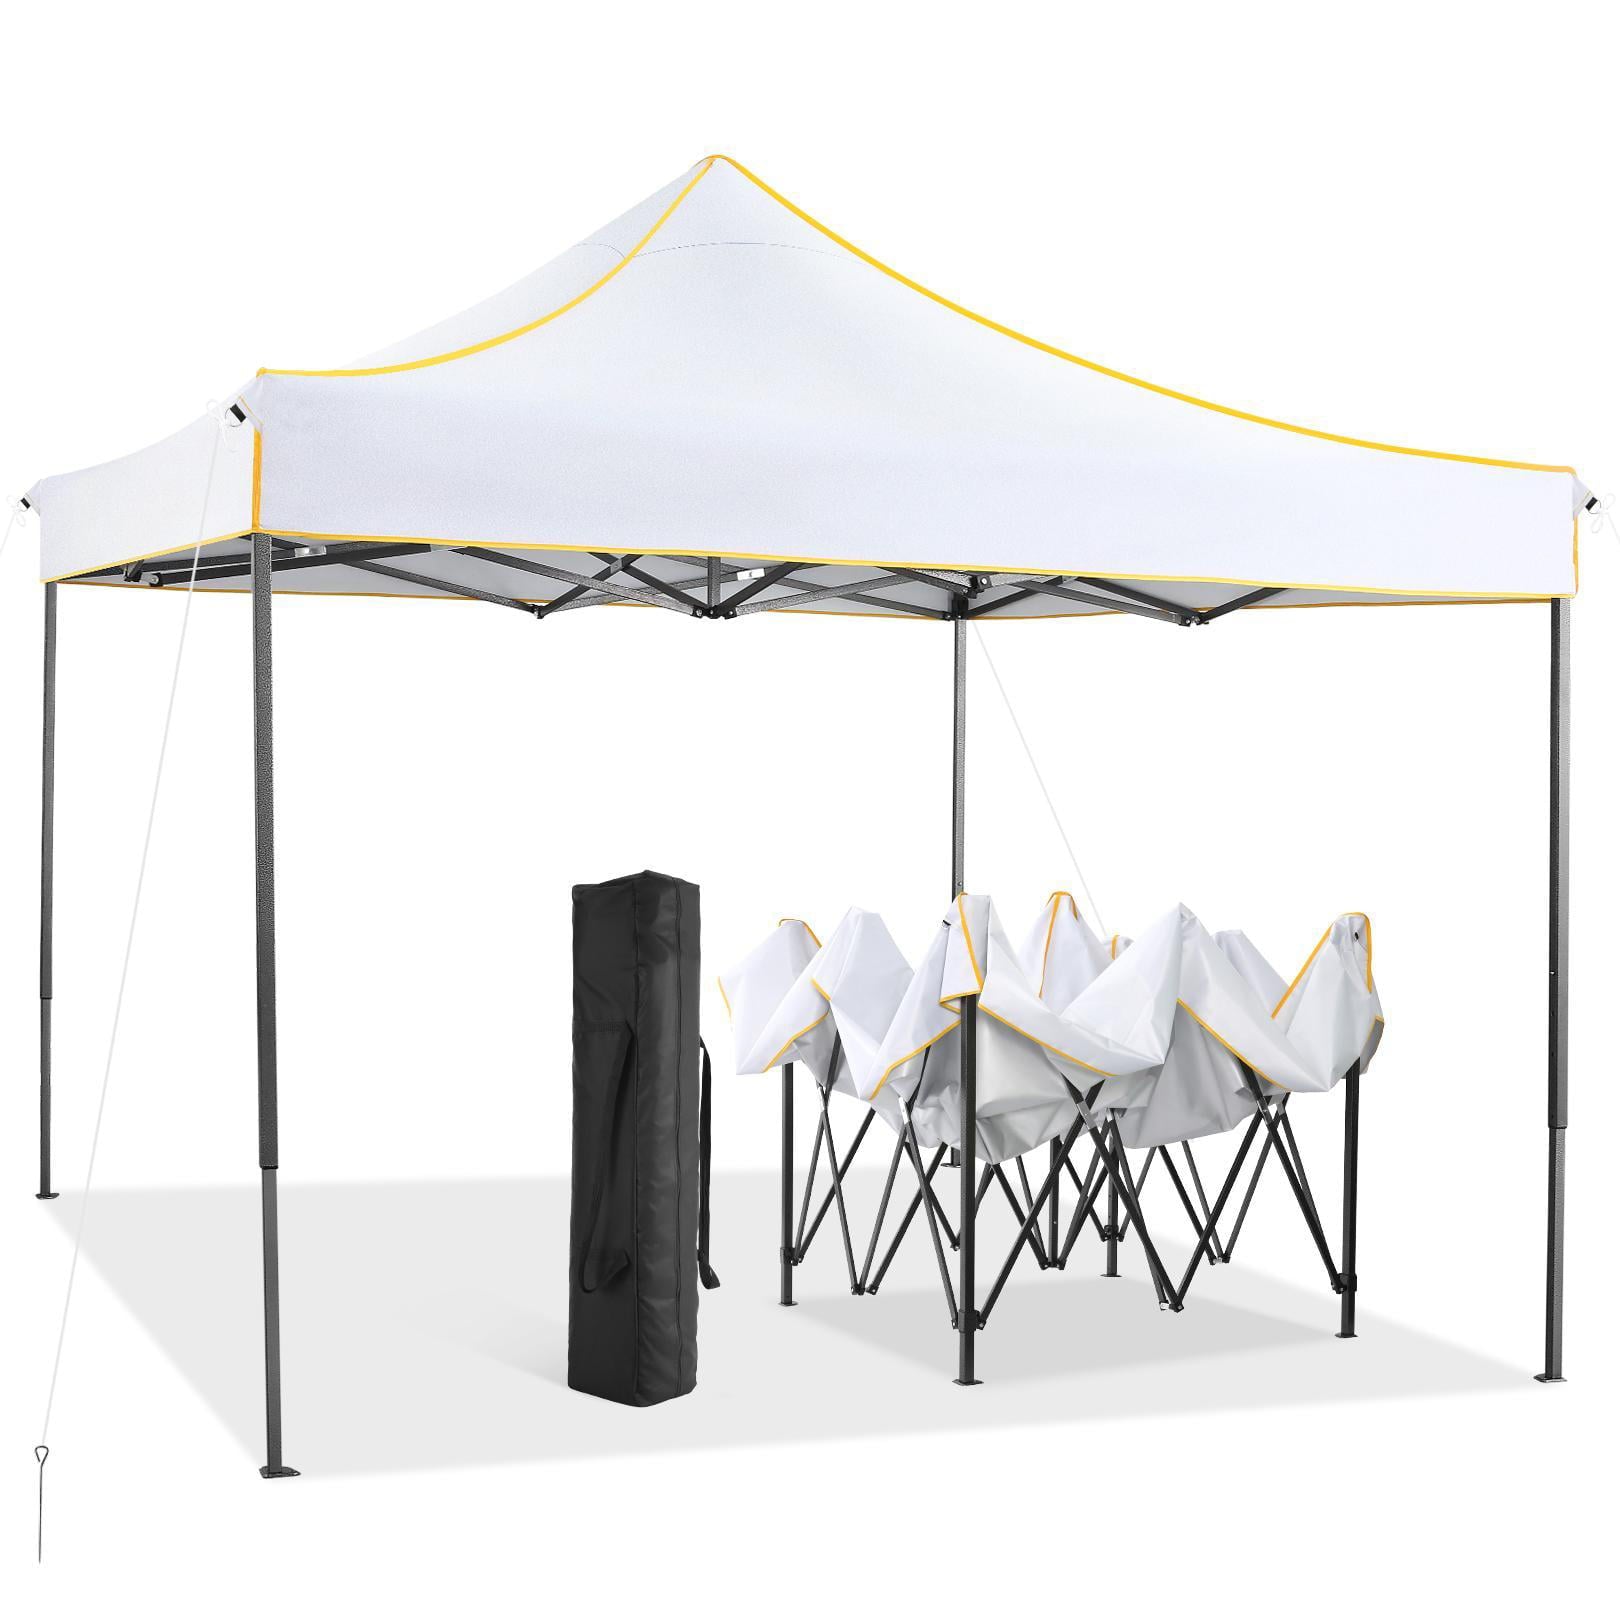 10'x10' Outdoor Canopies Gazebo - Pop Up Instant Gazebo with Waterproof and UV Protection - Patio Gazebo for Backyard, Outdoor, Patio and Lawn